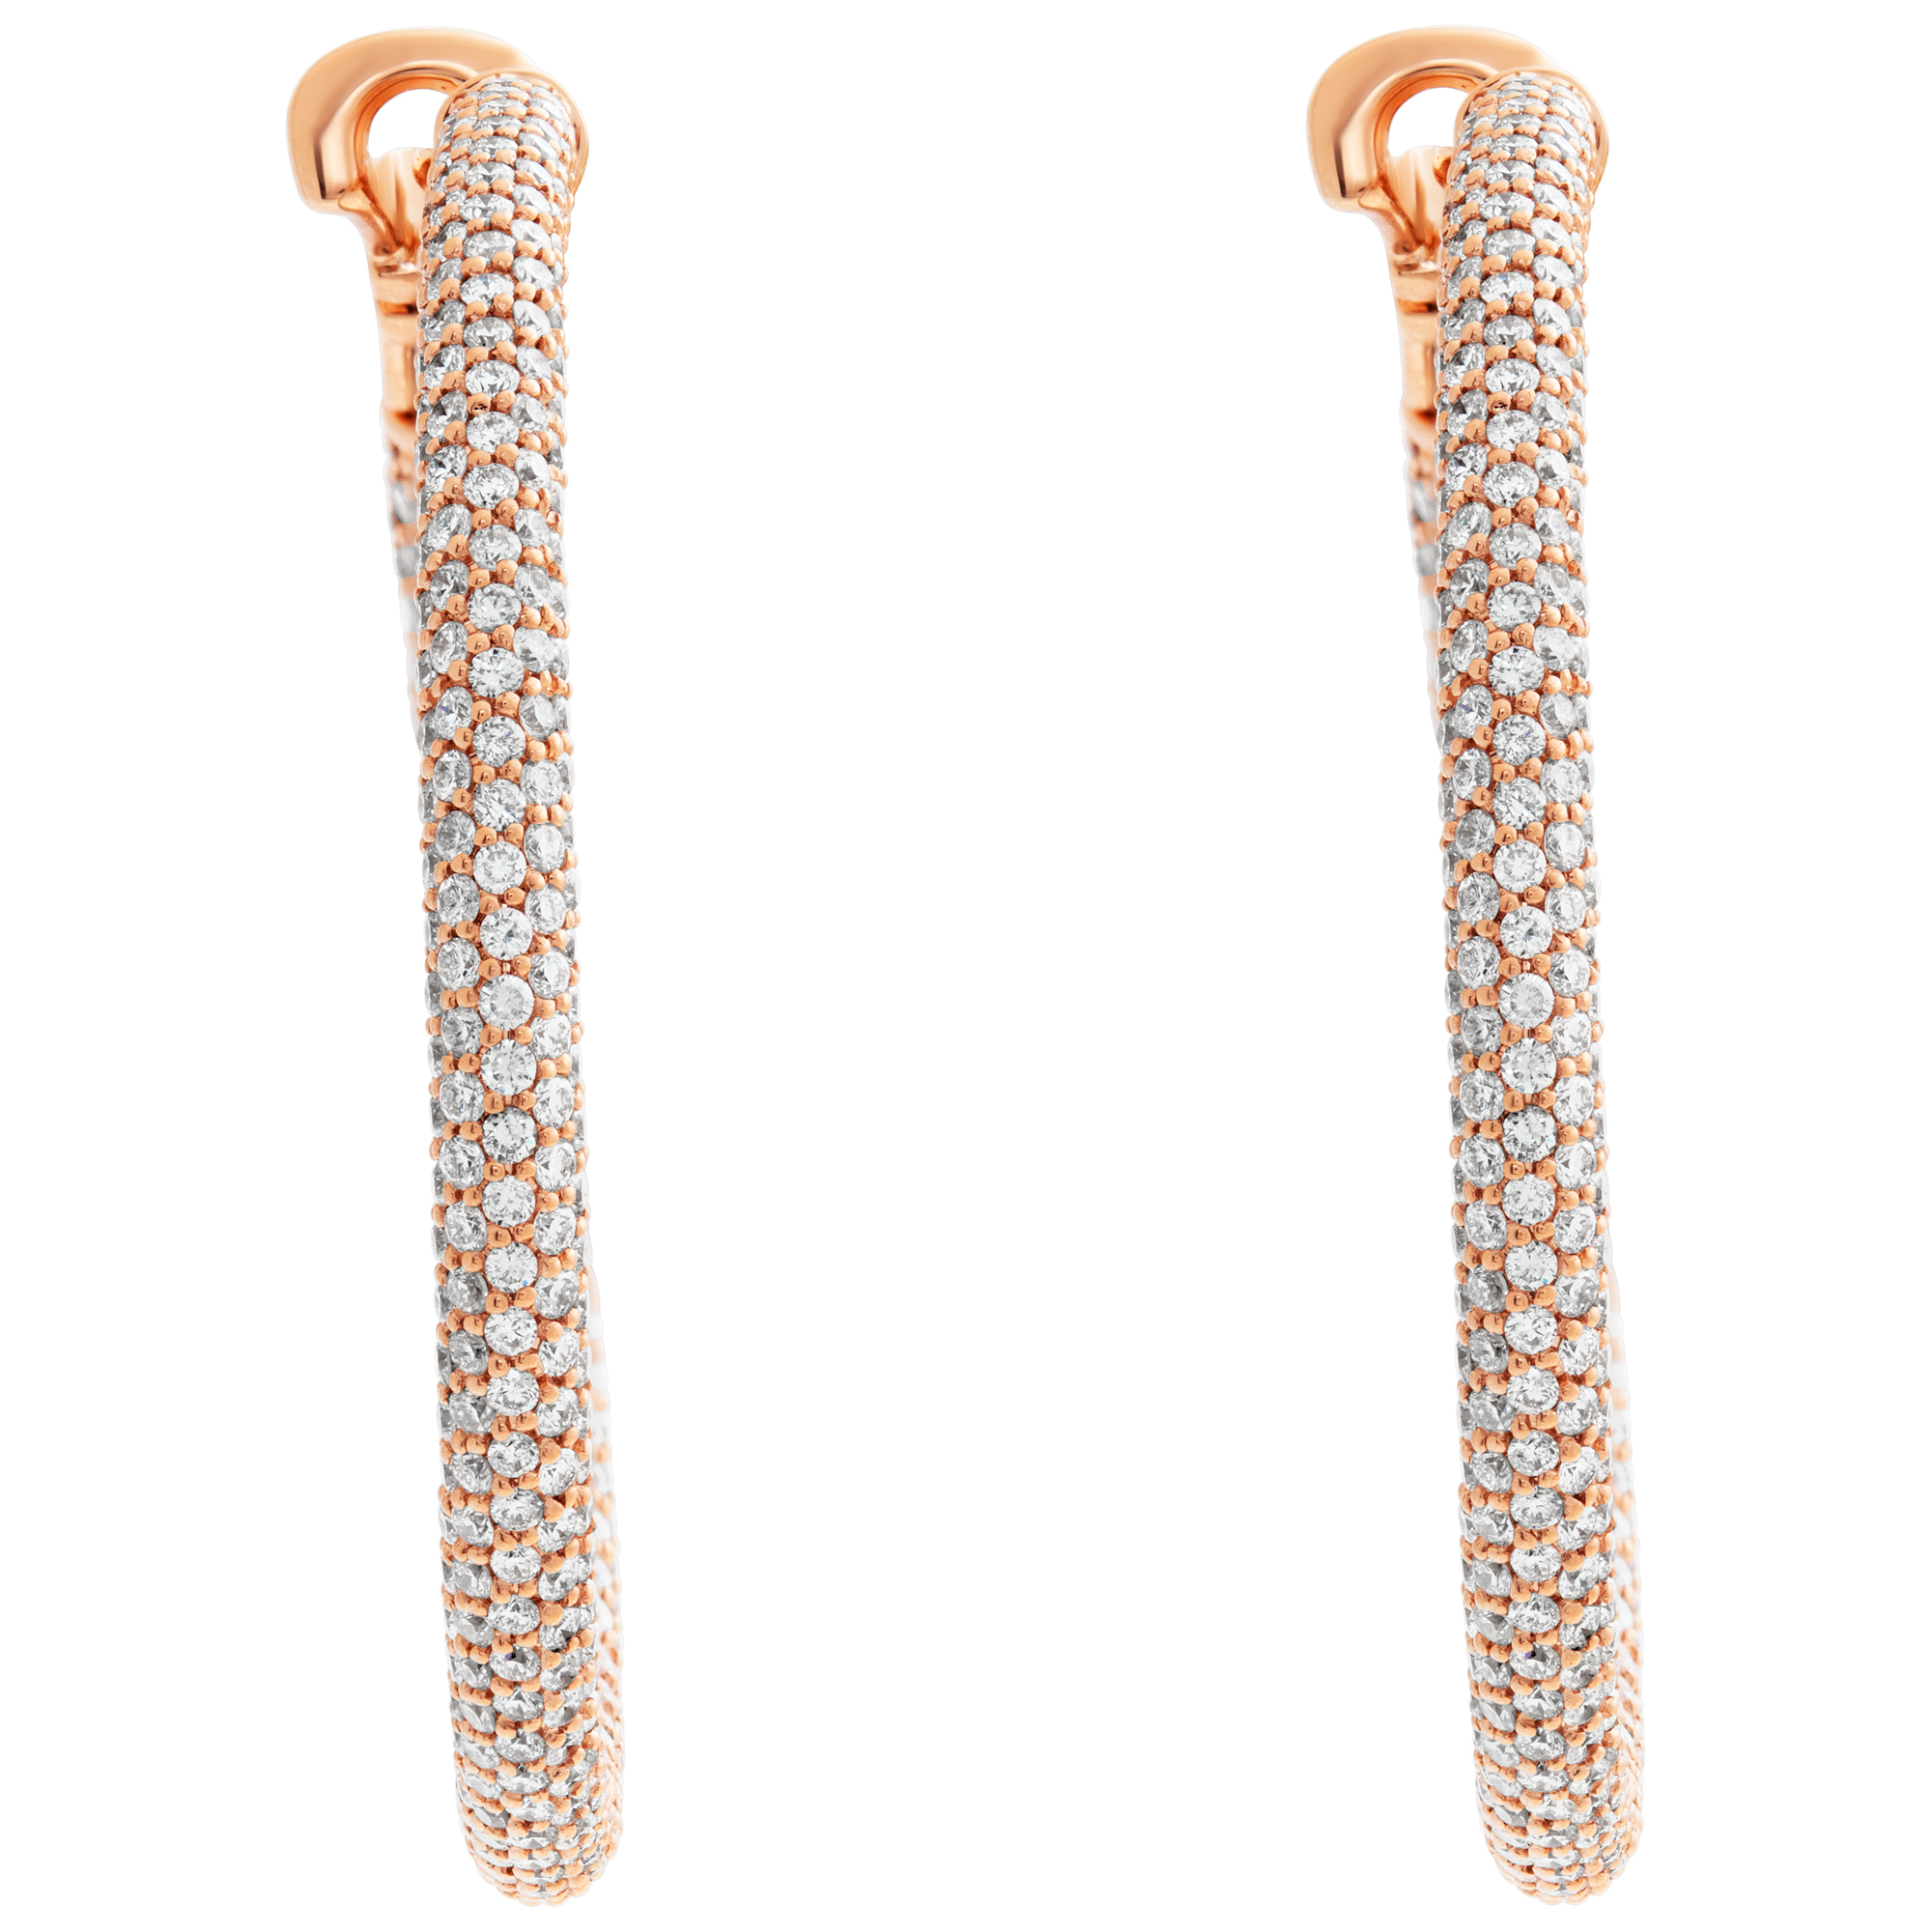 18k rose gold pave hoop earrings with 6.90 carats in round brilliant cut diamonds